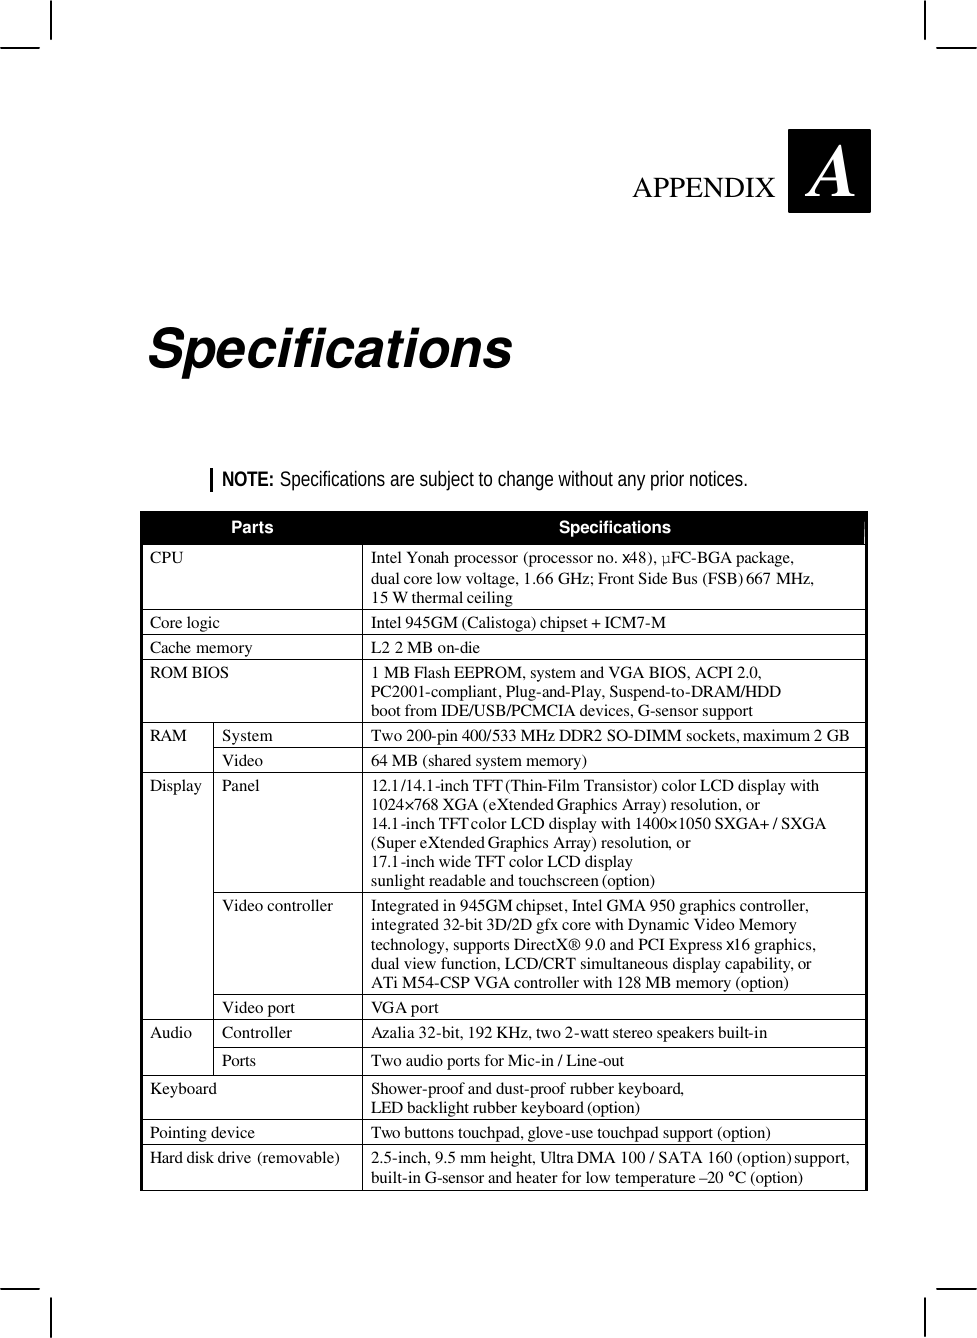   APPENDIX A Specifications NOTE: Specifications are subject to change without any prior notices.  Parts Specifications CPU Intel Yonah processor (processor no. x48), µFC-BGA package, dual core low voltage, 1.66 GHz; Front Side Bus (FSB) 667 MHz, 15 W thermal ceiling Core logic Intel 945GM (Calistoga) chipset + ICM7-M Cache memory L2 2 MB on-die ROM BIOS 1 MB Flash EEPROM, system and VGA BIOS, ACPI 2.0, PC2001-compliant, Plug-and-Play, Suspend-to-DRAM/HDD boot from IDE/USB/PCMCIA devices, G-sensor support System Two 200-pin 400/533 MHz DDR2 SO-DIMM sockets, maximum 2 GB RAM Video 64 MB (shared system memory) Panel 12.1/14.1-inch TFT (Thin-Film Transistor) color LCD display with 1024×768 XGA (eXtended Graphics Array) resolution, or 14.1-inch TFT color LCD display with 1400×1050 SXGA+ / SXGA (Super eXtended Graphics Array) resolution, or 17.1-inch wide TFT color LCD display sunlight readable and touchscreen (option) Video controller Integrated in 945GM chipset, Intel GMA 950 graphics controller, integrated 32-bit 3D/2D gfx core with Dynamic Video Memory technology, supports DirectX® 9.0 and PCI Express x16 graphics, dual view function, LCD/CRT simultaneous display capability, or ATi M54-CSP VGA controller with 128 MB memory (option) Display Video port VGA port Controller Azalia 32-bit, 192 KHz, two 2-watt stereo speakers built-in Audio Ports Two audio ports for Mic-in / Line-out Keyboard Shower-proof and dust-proof rubber keyboard, LED backlight rubber keyboard (option) Pointing device Two buttons touchpad, glove-use touchpad support (option) Hard disk drive (removable) 2.5-inch, 9.5 mm height, Ultra DMA 100 / SATA 160 (option) support, built-in G-sensor and heater for low temperature –20 °C (option) 